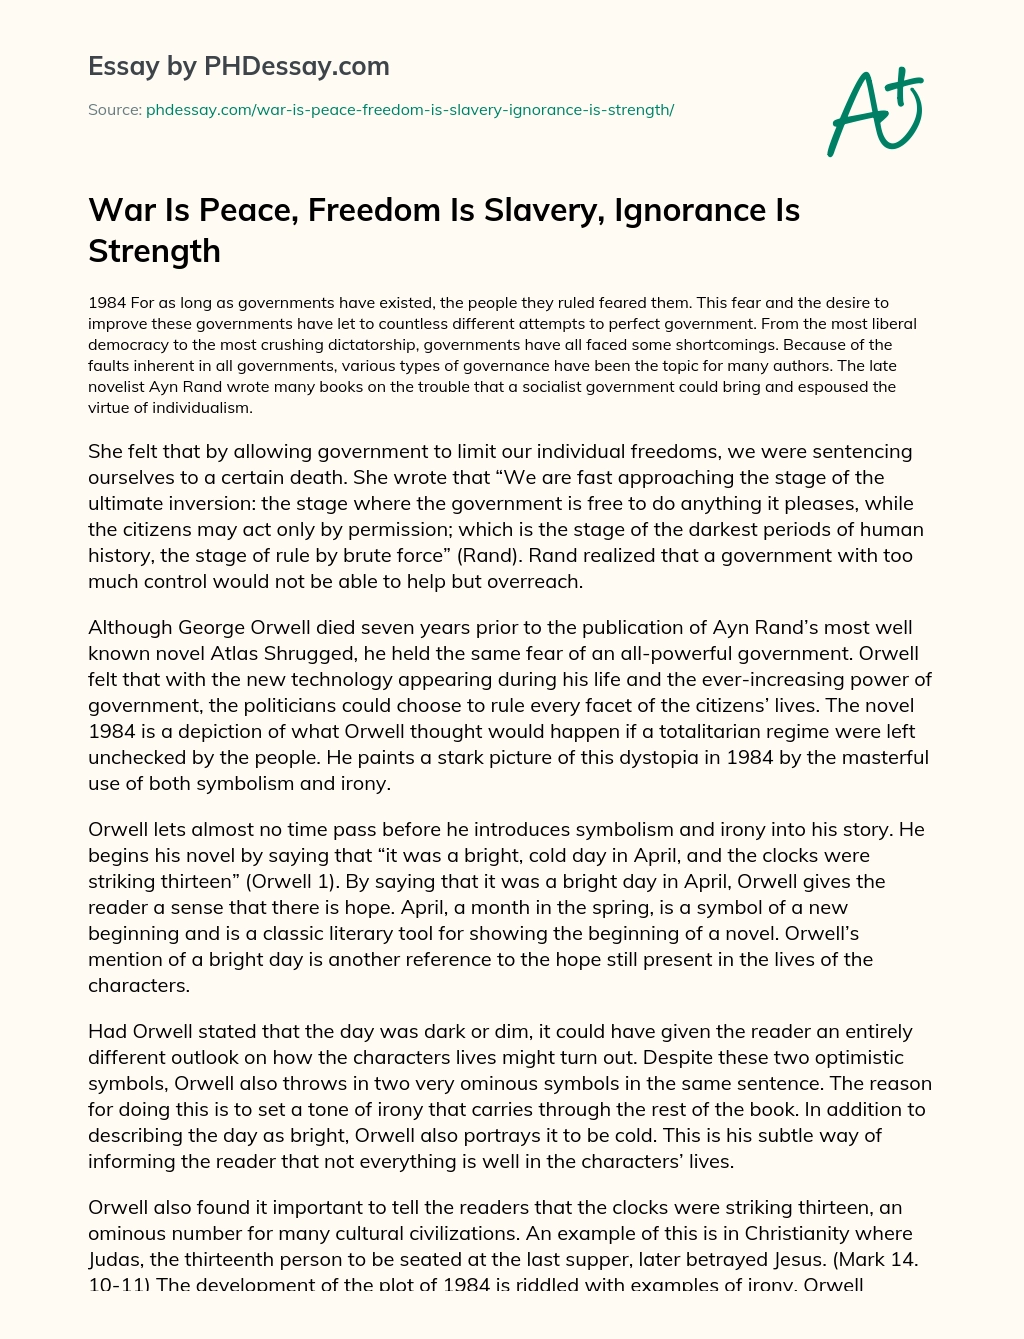 War Is Peace, Freedom Is Slavery, Ignorance Is Strength essay